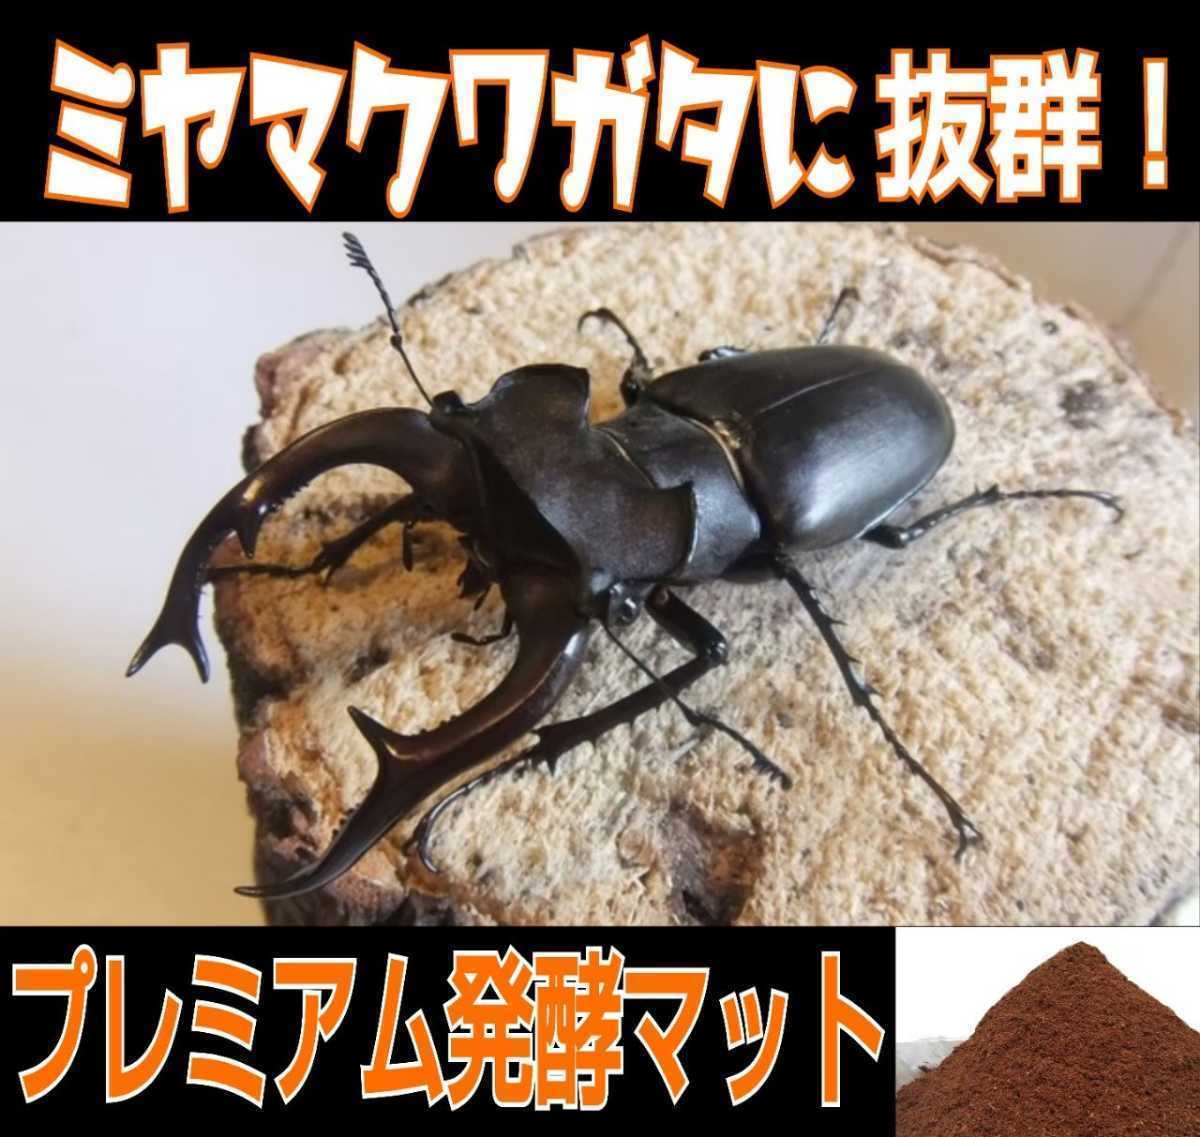  Miyama stag beetle . eminent, evolved! premium 3 next departure . mat [20L] symbiosis bacteria 3 times combination! Anne tae light * common ta*nijiiro* saw also 